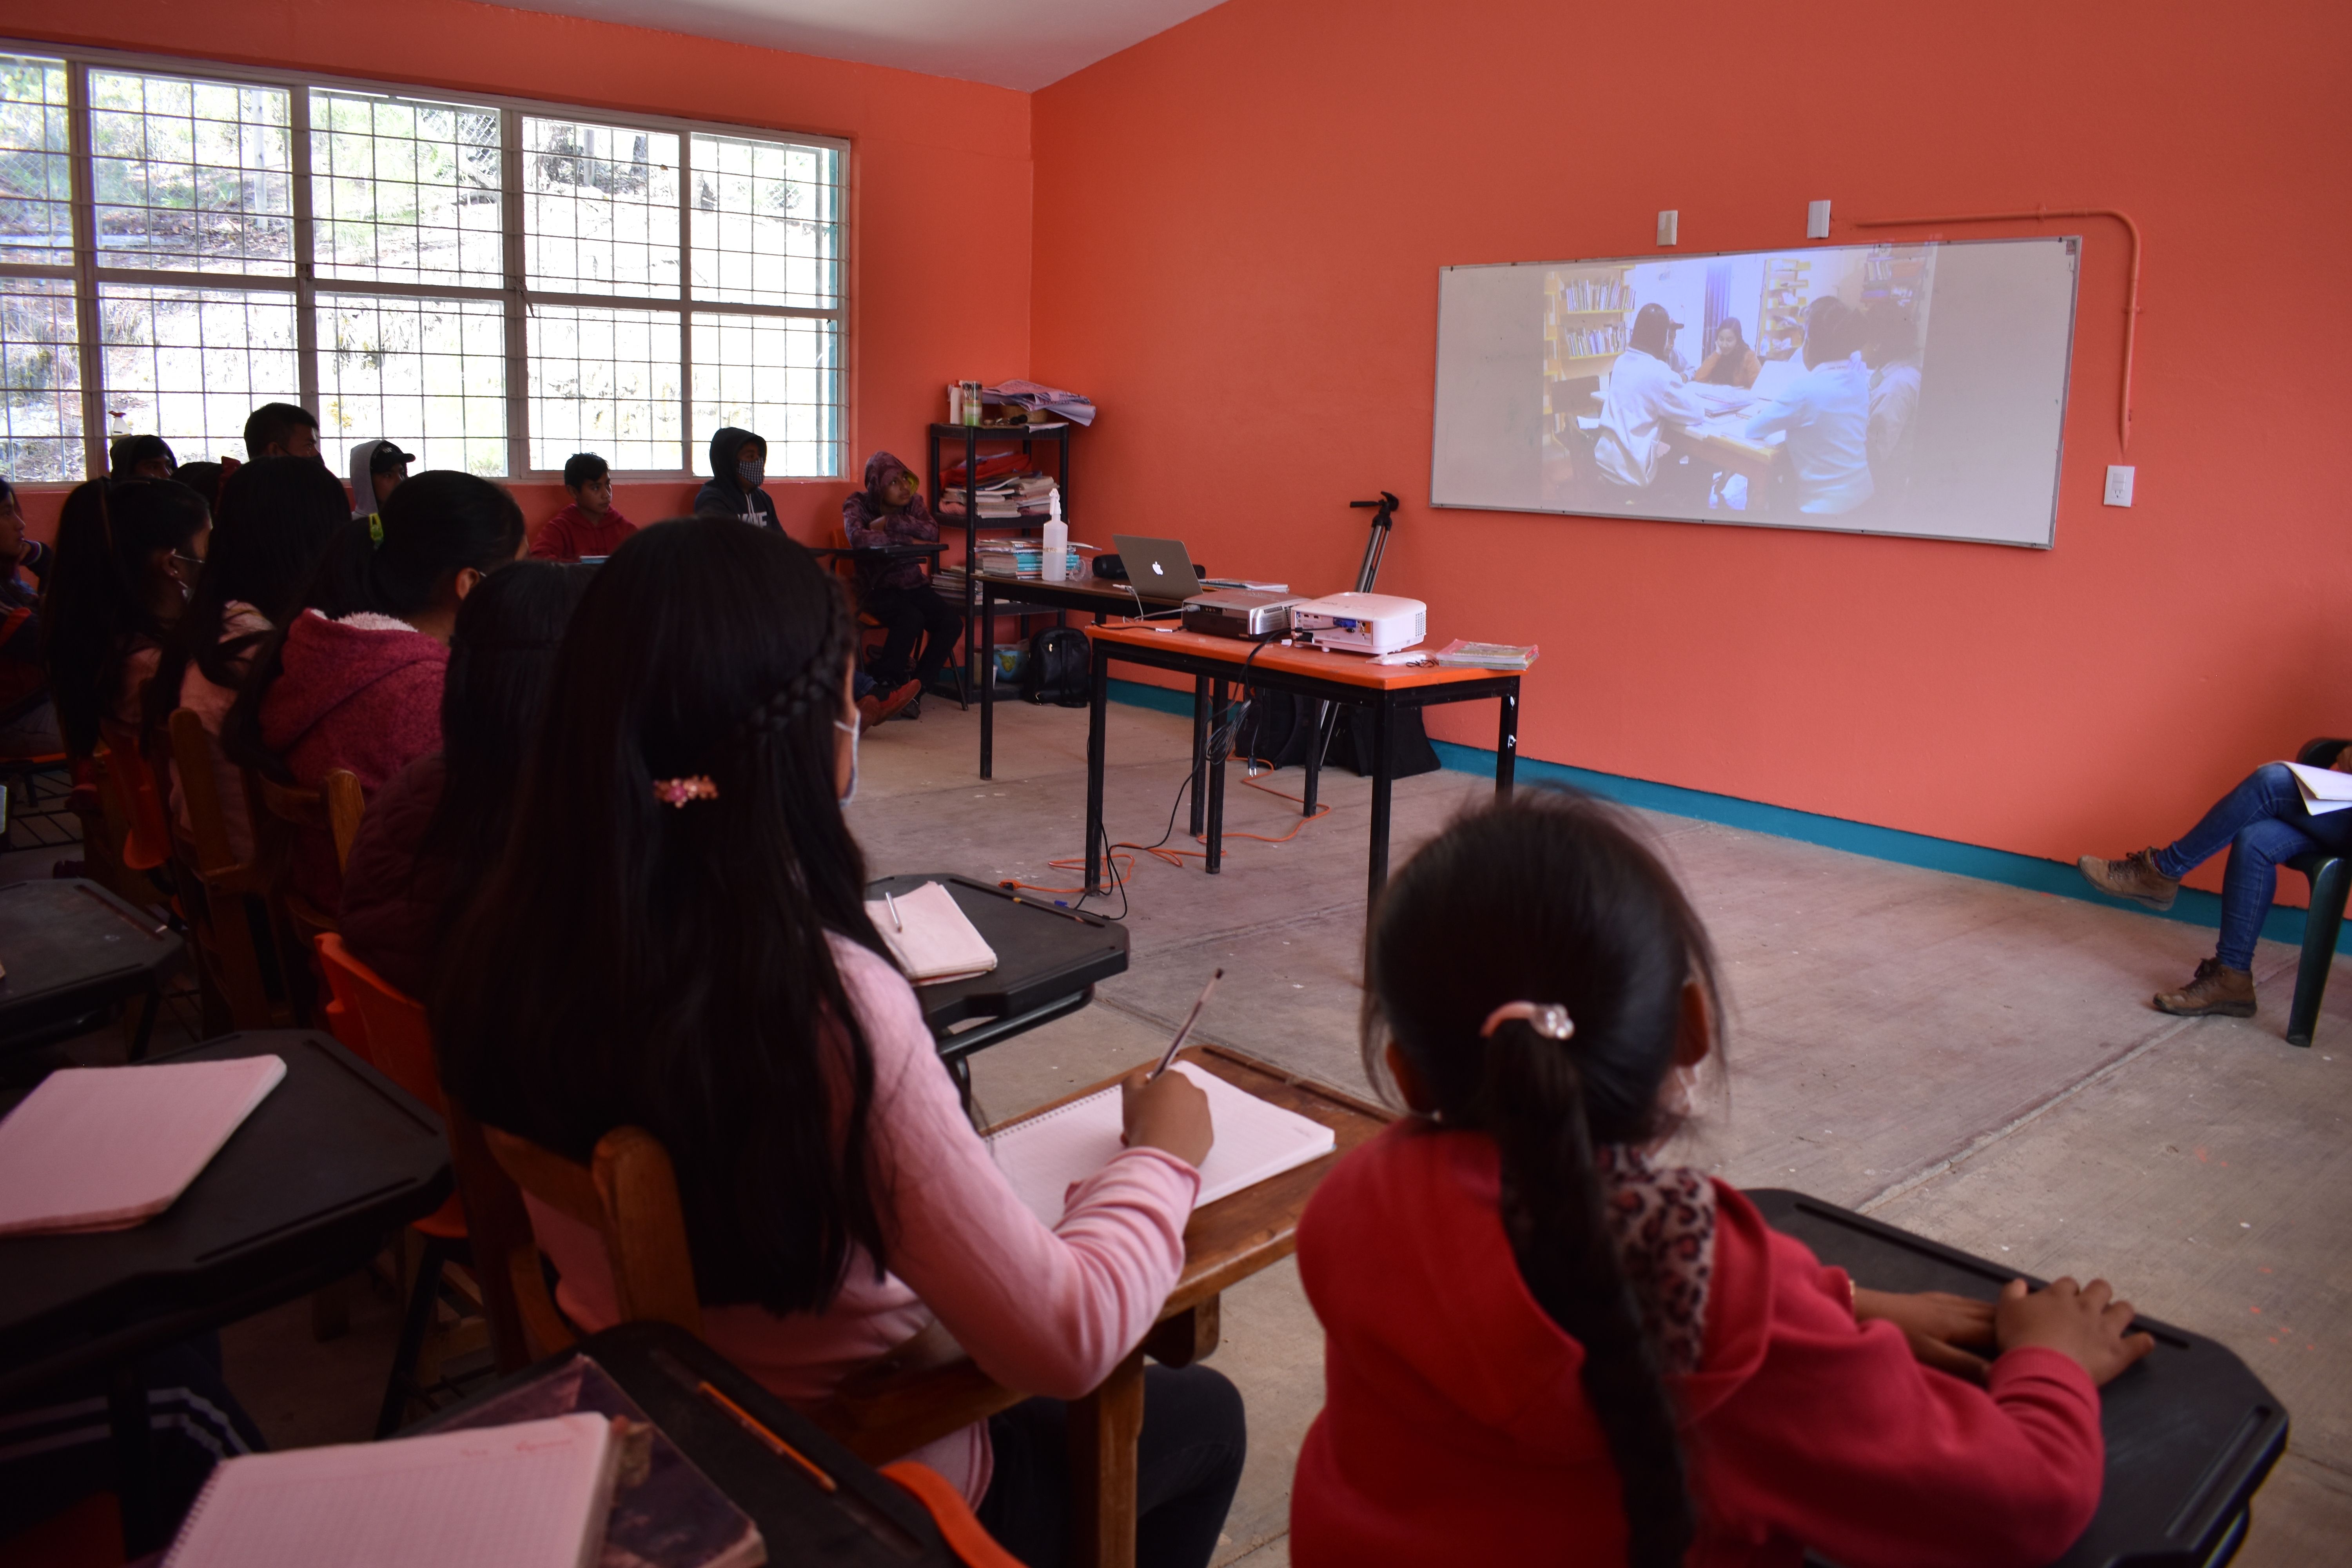 A class watches a film on a projector screen